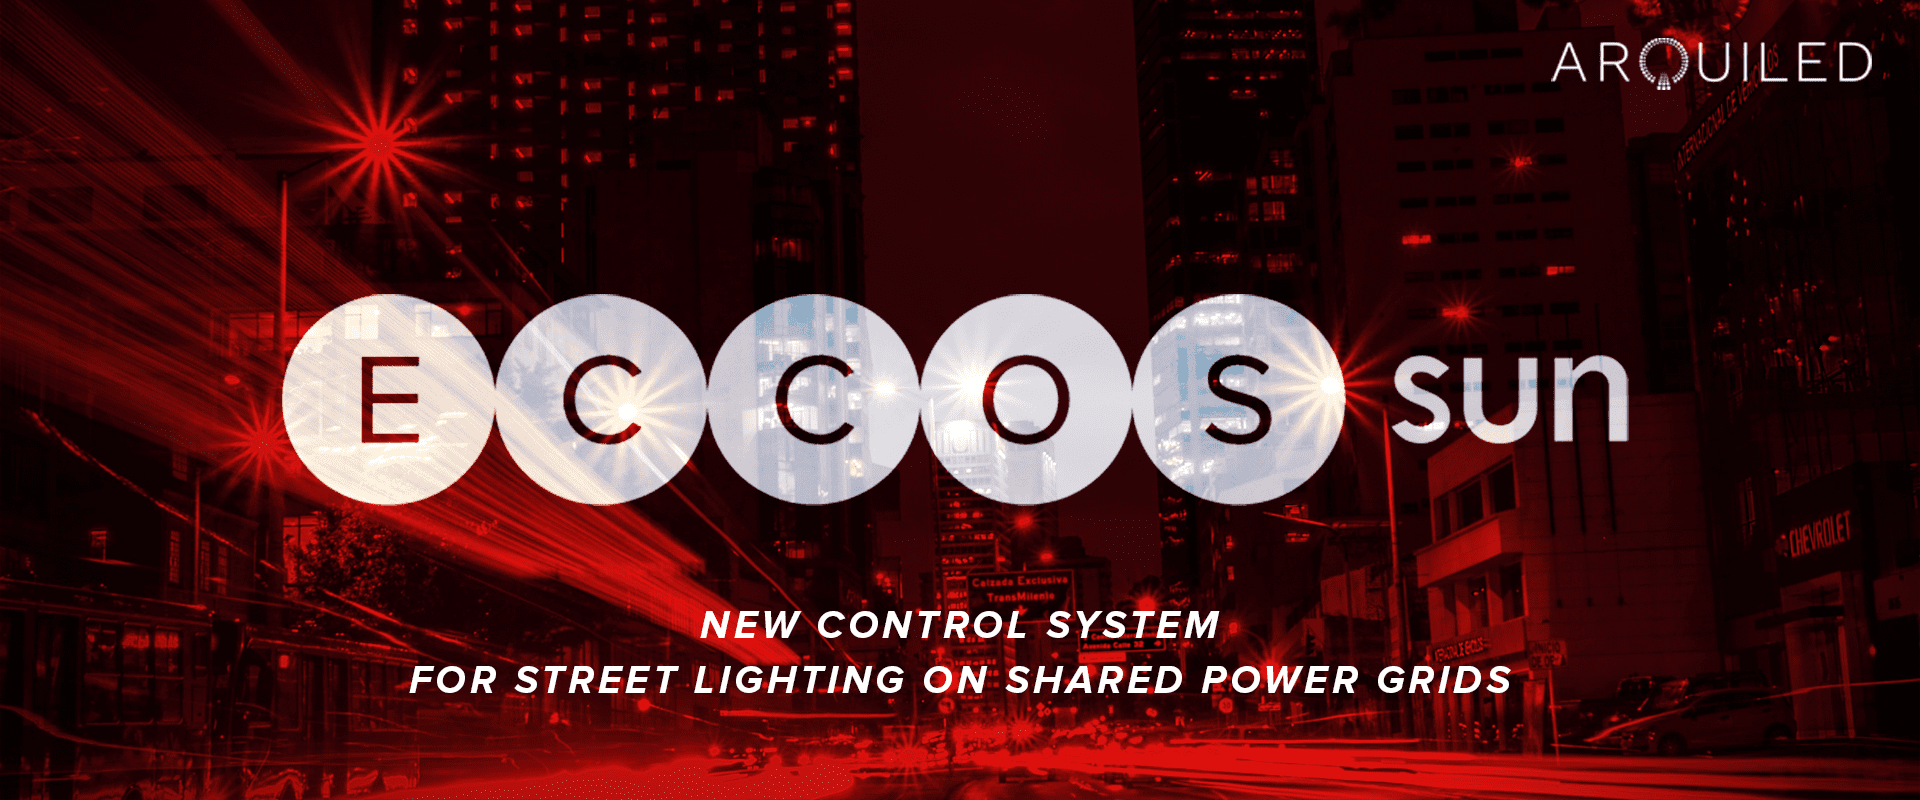 ECCOS SUN - Management system for shared power grids